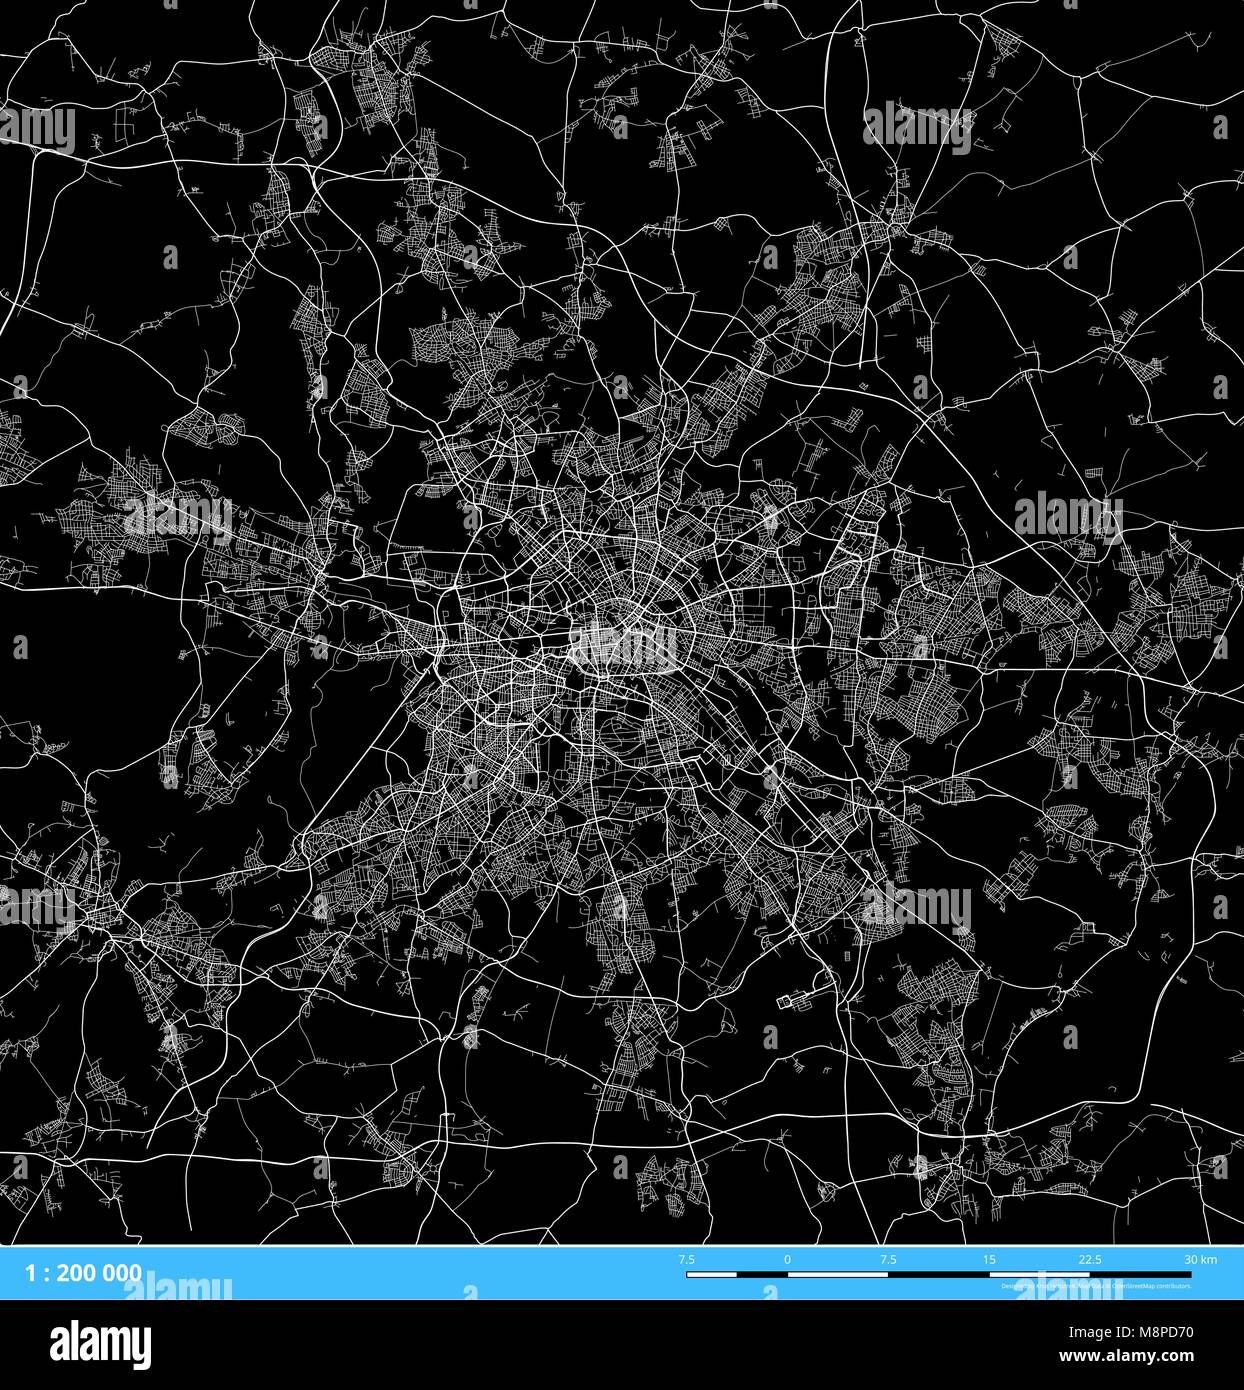 Berlin Urban Area City Map. Black and White Vector Silhouette Version ...